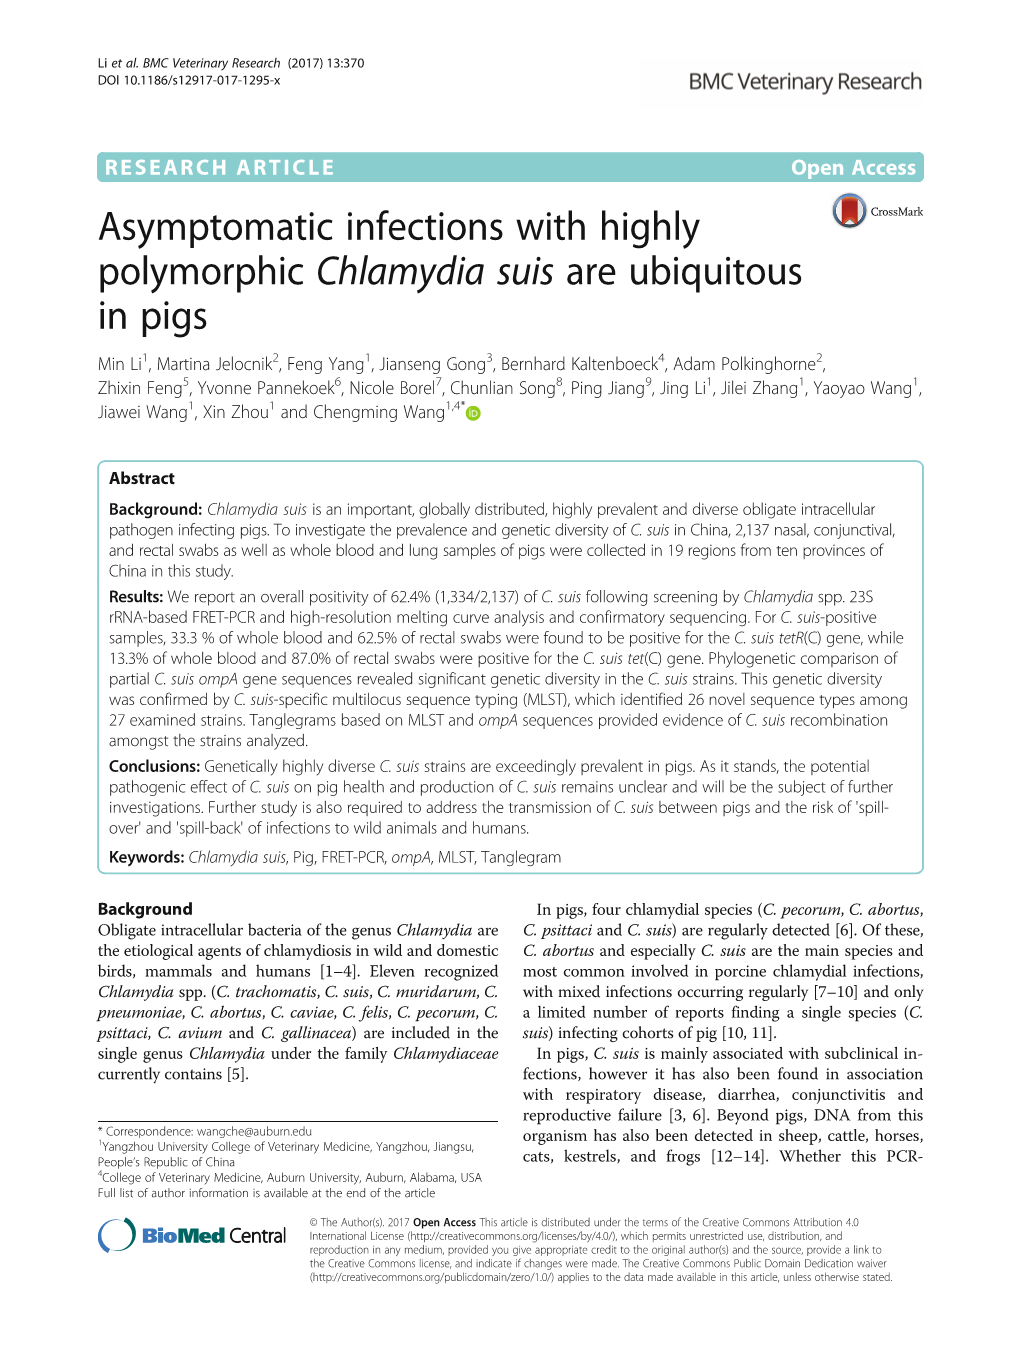 Asymptomatic Infections with Highly Polymorphic Chlamydia Suis Are